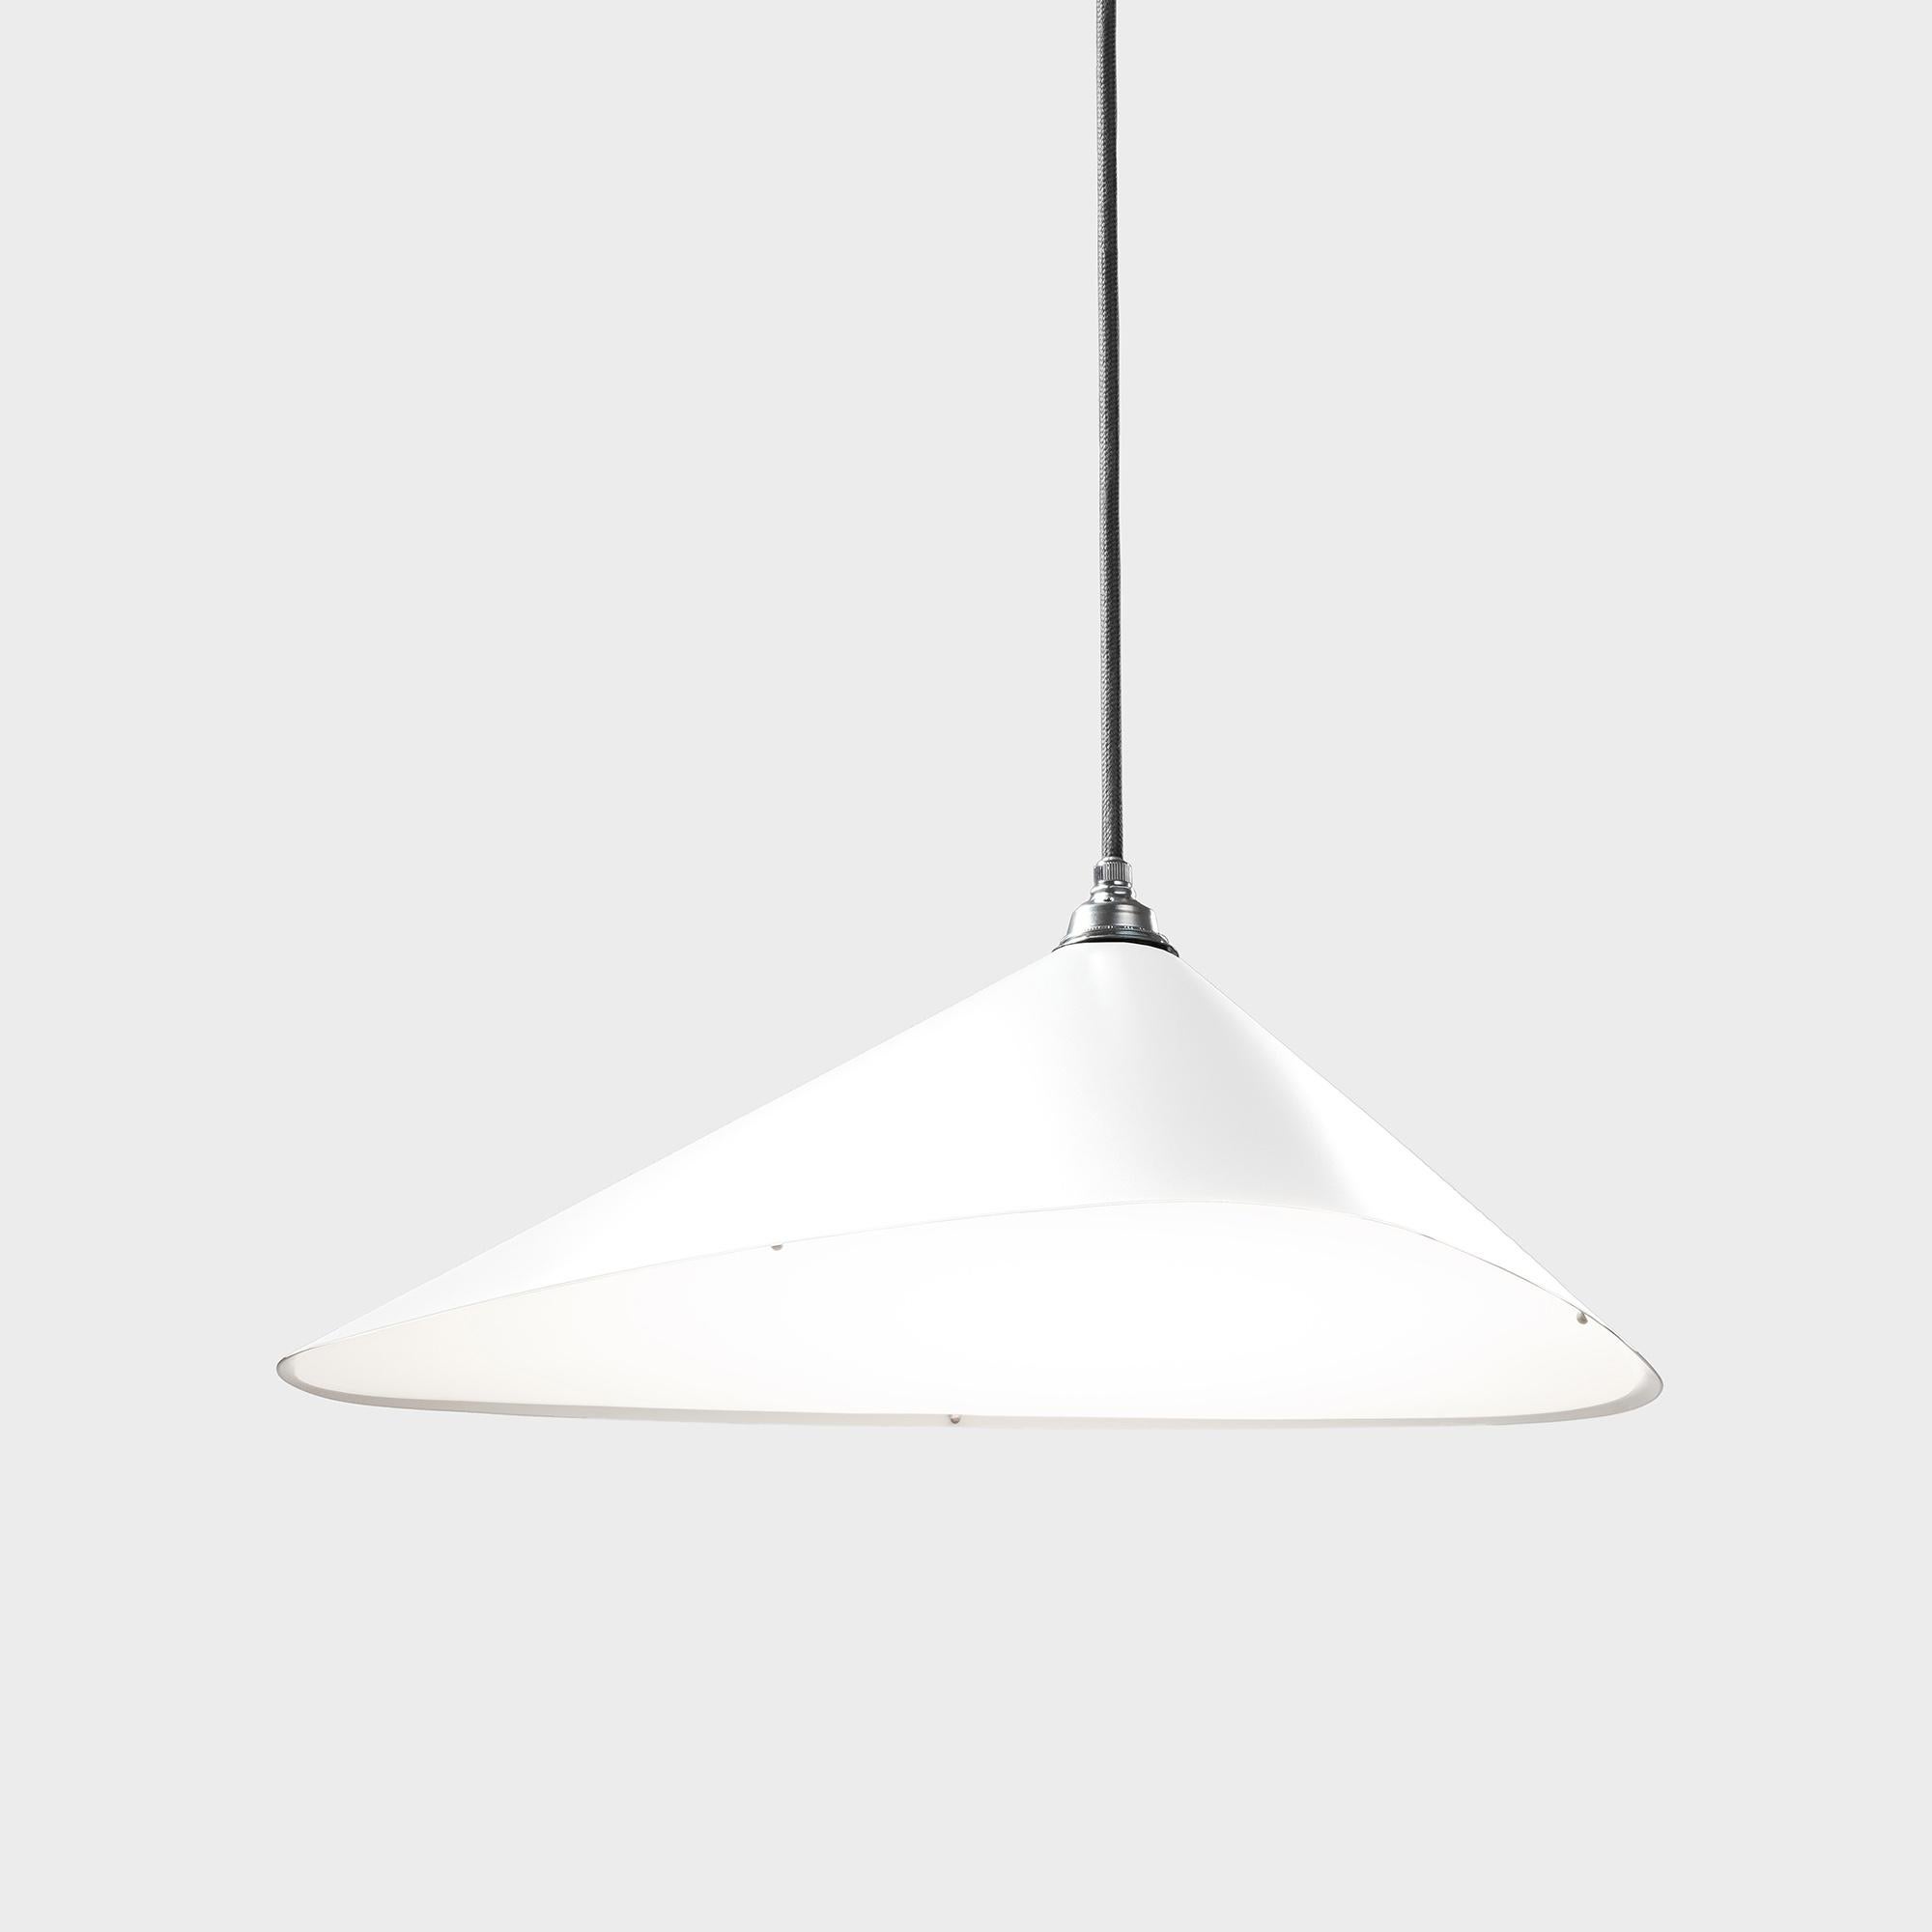 Daniel Becker 'Emily I' Pendant Lamp in Matte White For Moss Objects. Designed by Berlin luminary Daniel Becker and handmade to order using mid-century manufacturing techniques. Executed in high-quality sheet metal with up to ten layers glossy or